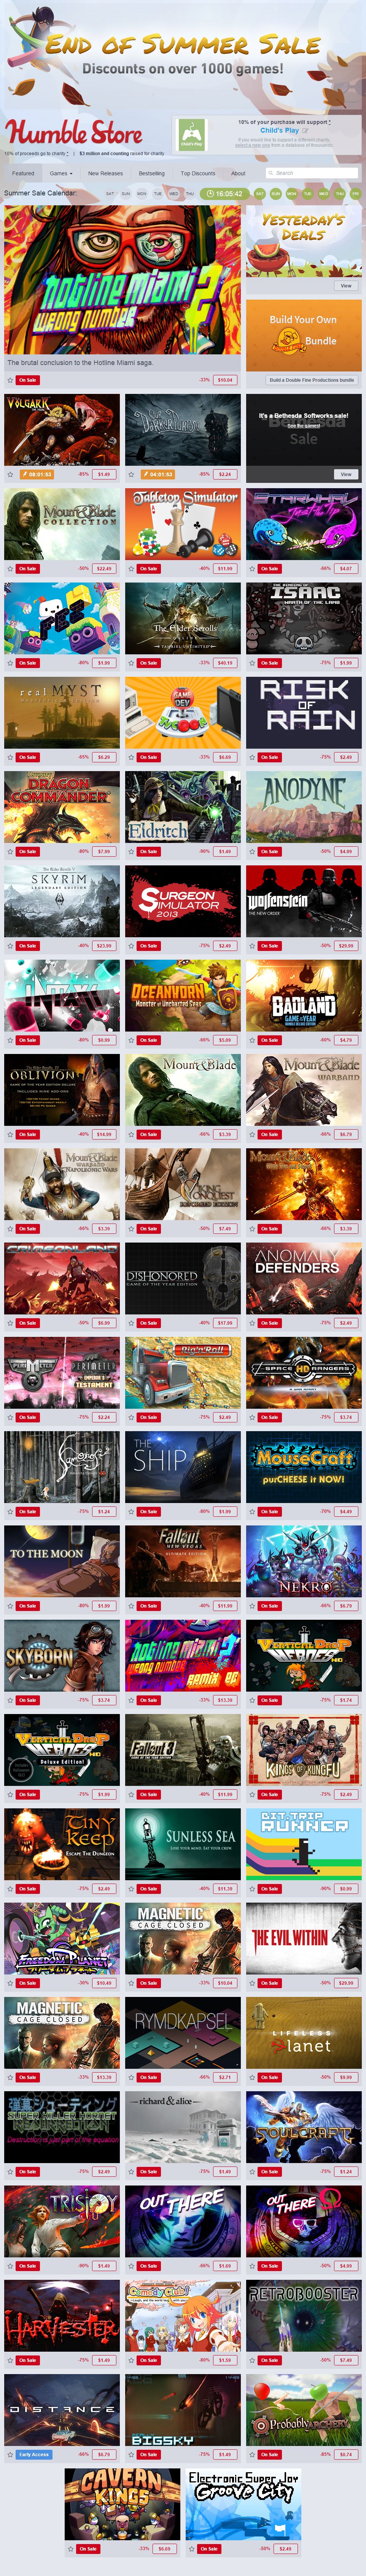 'The Humble Store_ Great games_ Fantastic prices_ Support charity_' - www_humblebundle_com_store.jpg